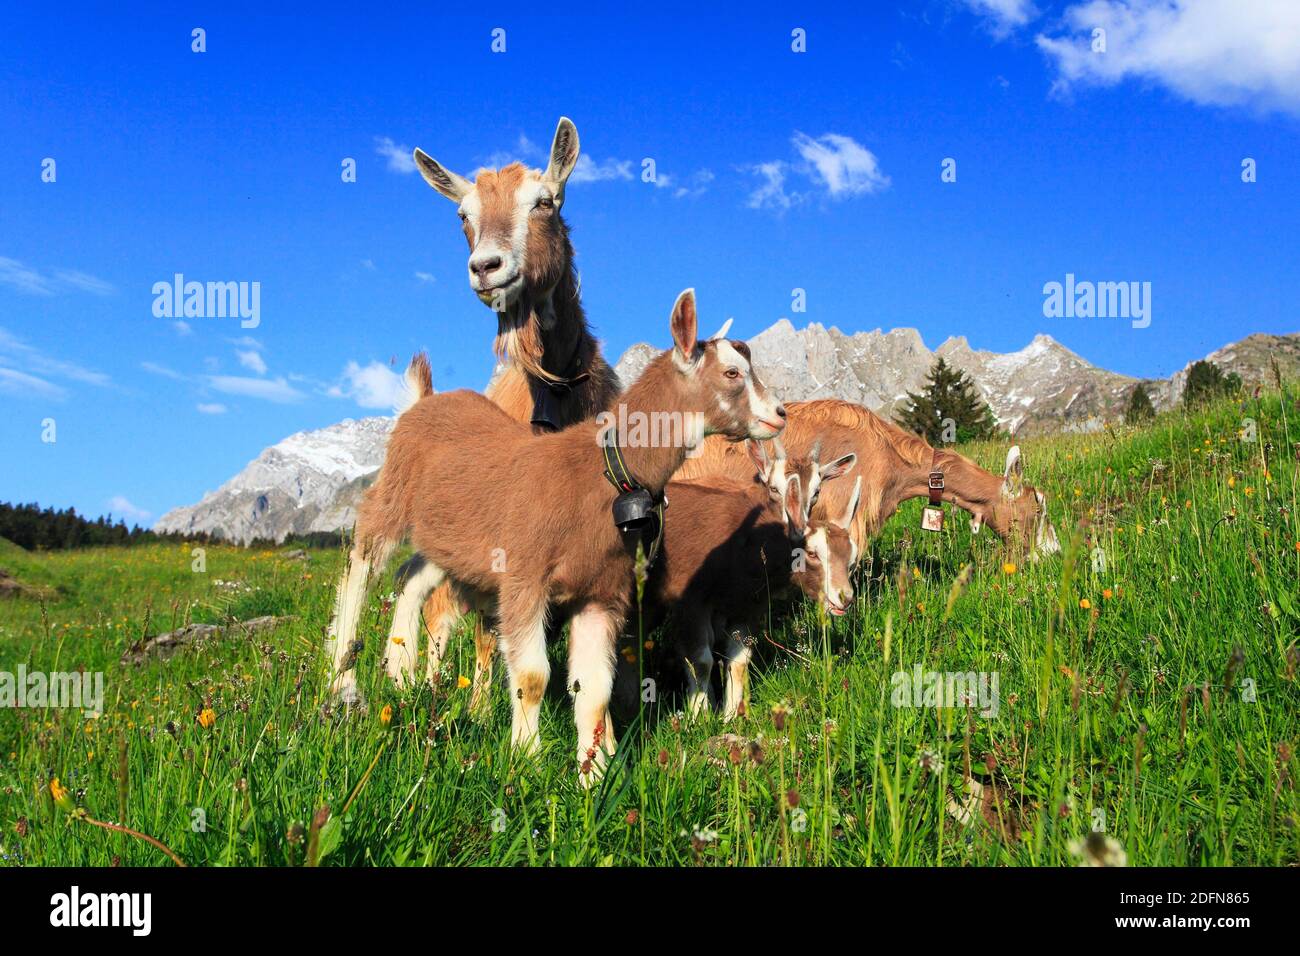 House goats on the alp, goat, goats, females and young animals, Alpstein massif, Appenzell, Switzerland Stock Photo